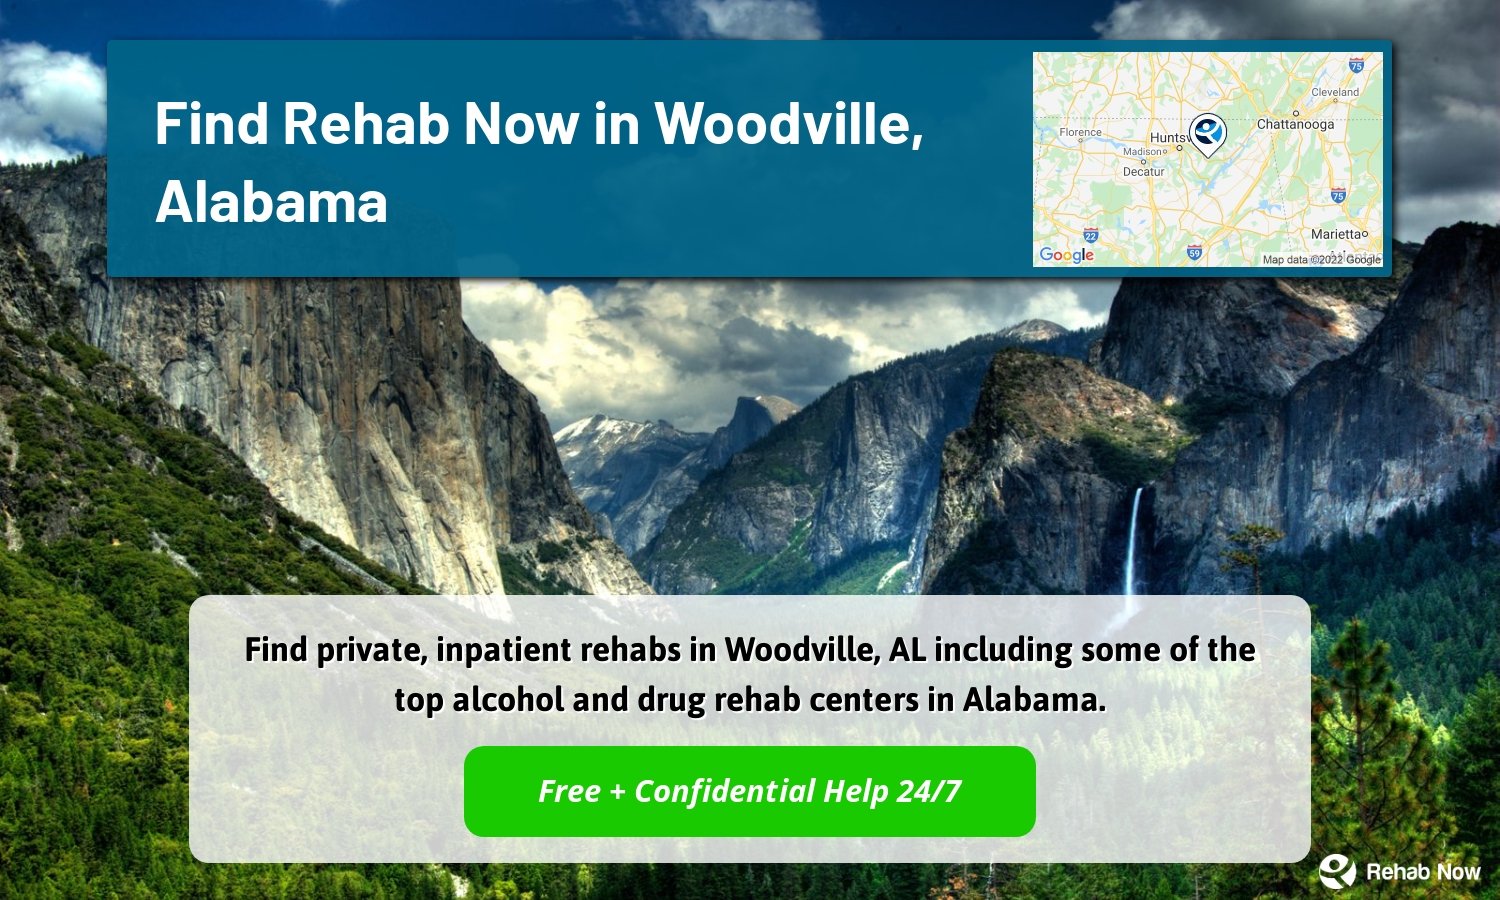 Find private, inpatient rehabs in Woodville, AL including some of the top alcohol and drug rehab centers in Alabama.